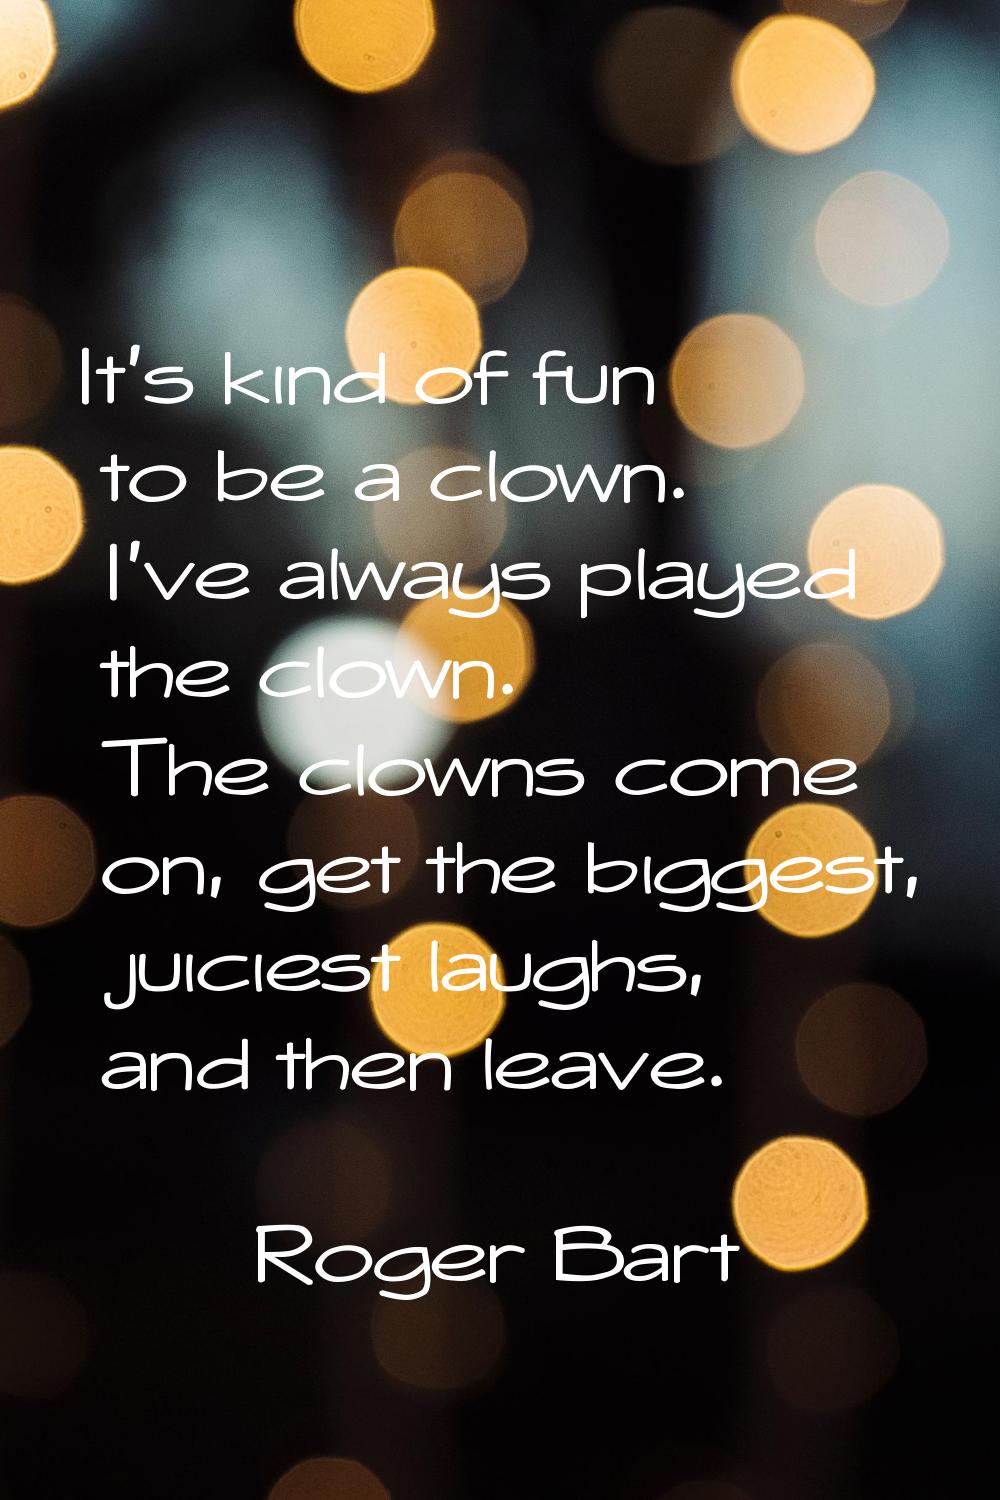 It's kind of fun to be a clown. I've always played the clown. The clowns come on, get the biggest, 